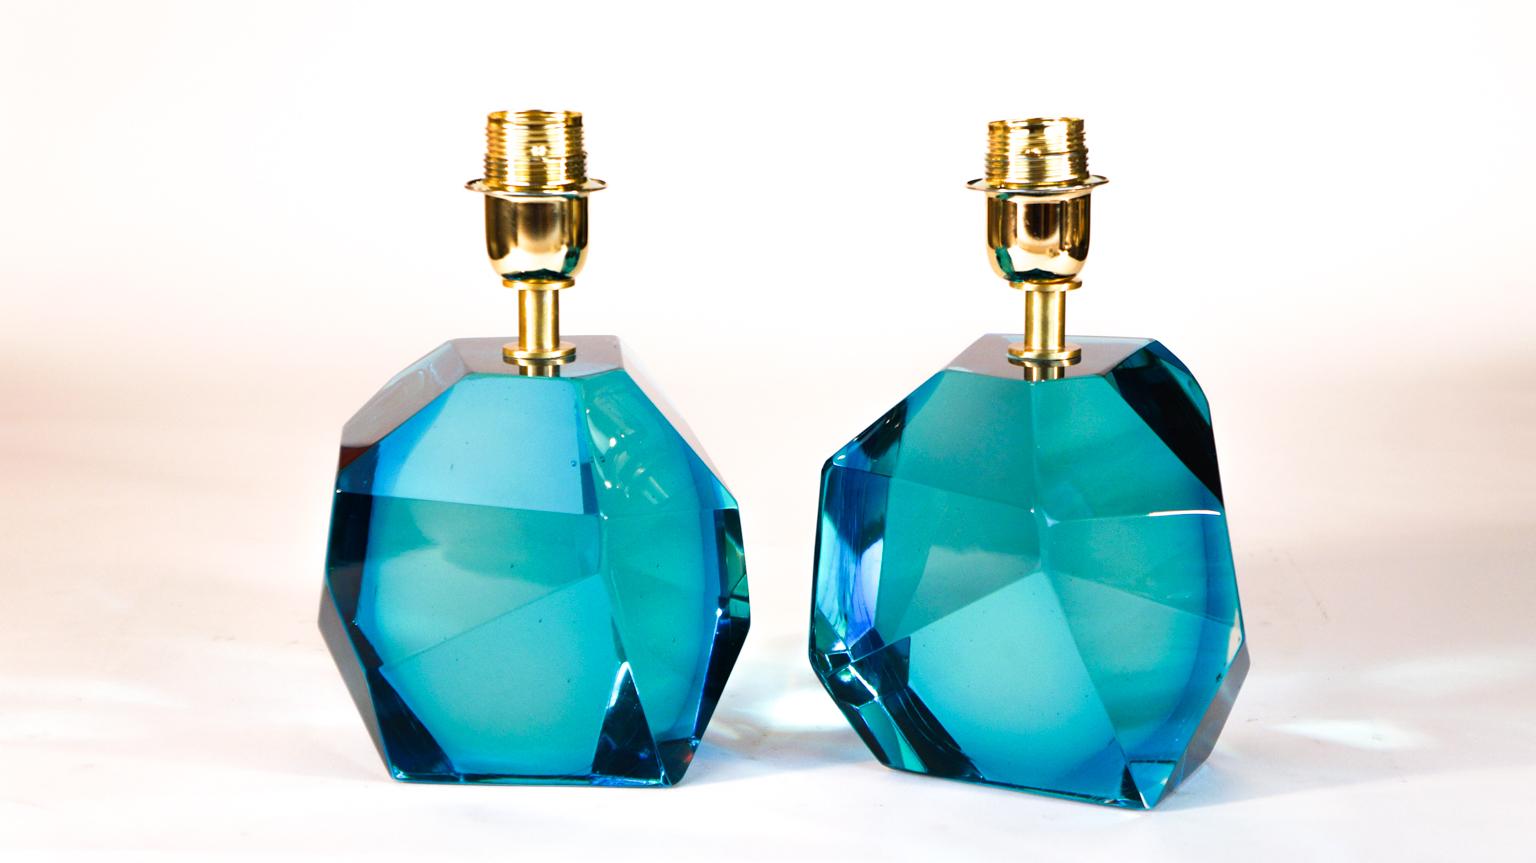 Compact and very solid table lamps, small but effective, the beauty of this is its faceted surface that create reflects and many shades of color.
In the picture a pair of aquamarine lamps, with the lamps bulb socket is included.
The products are